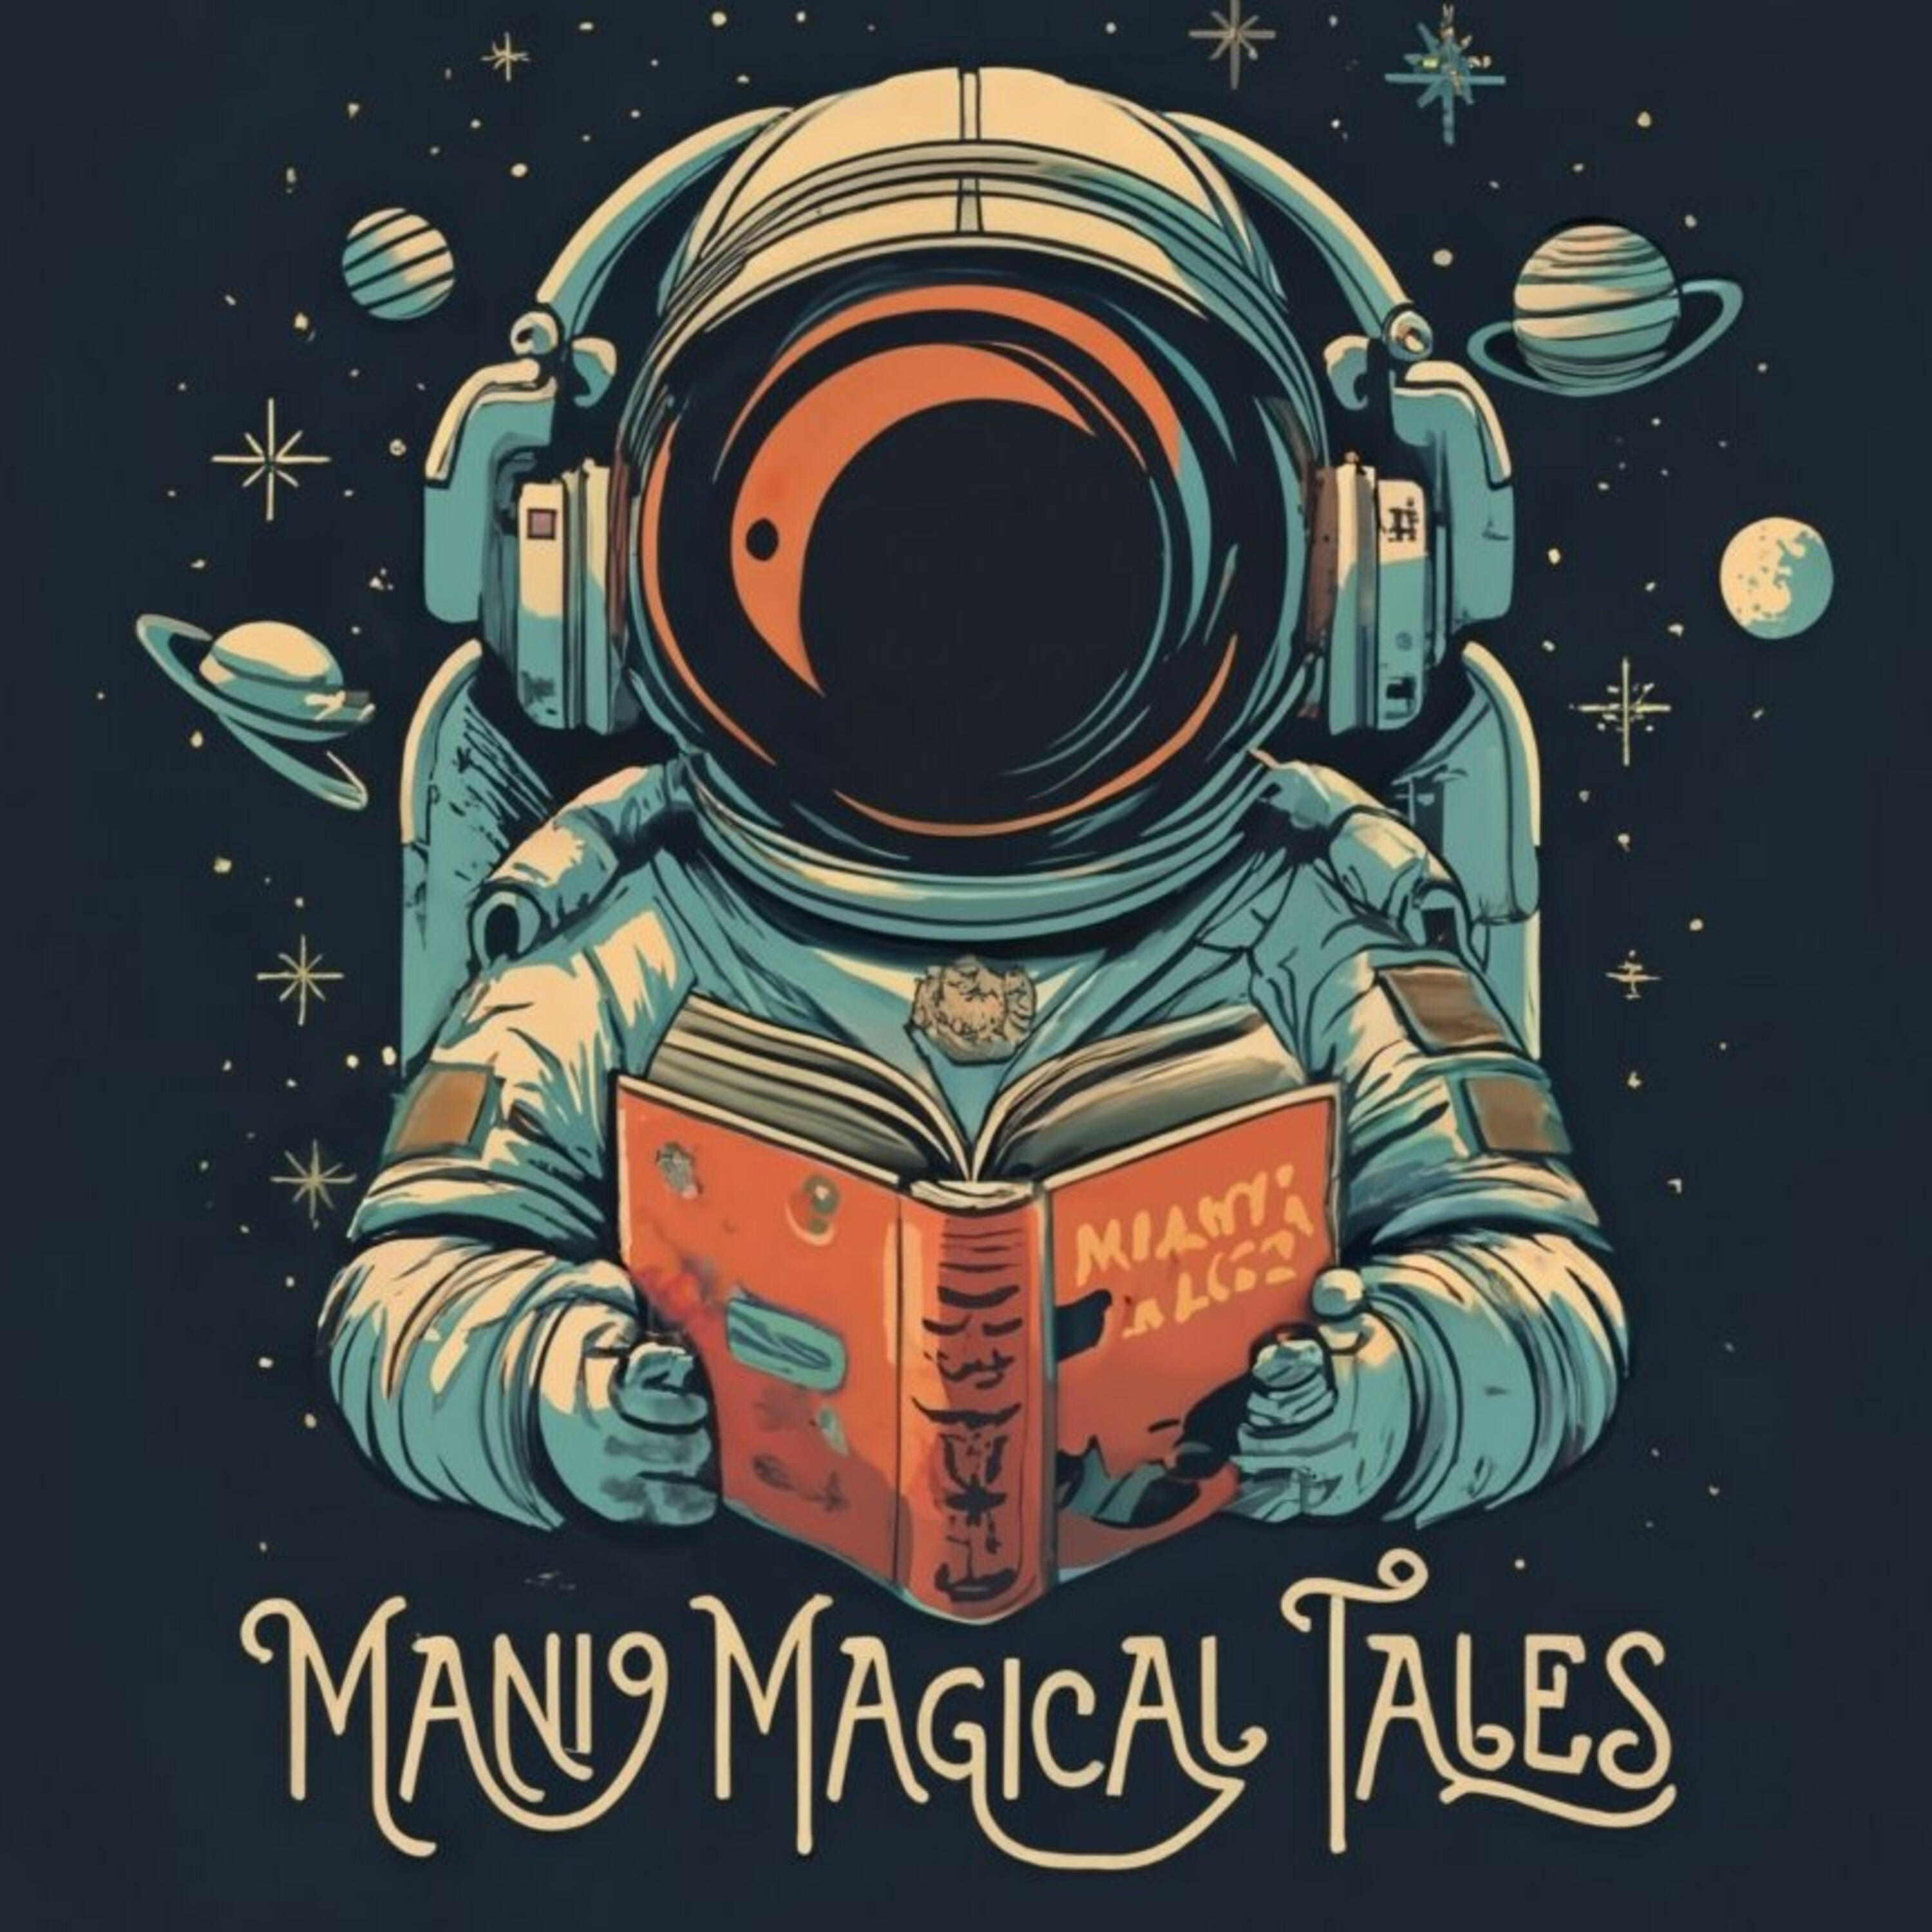 The Magical Tales